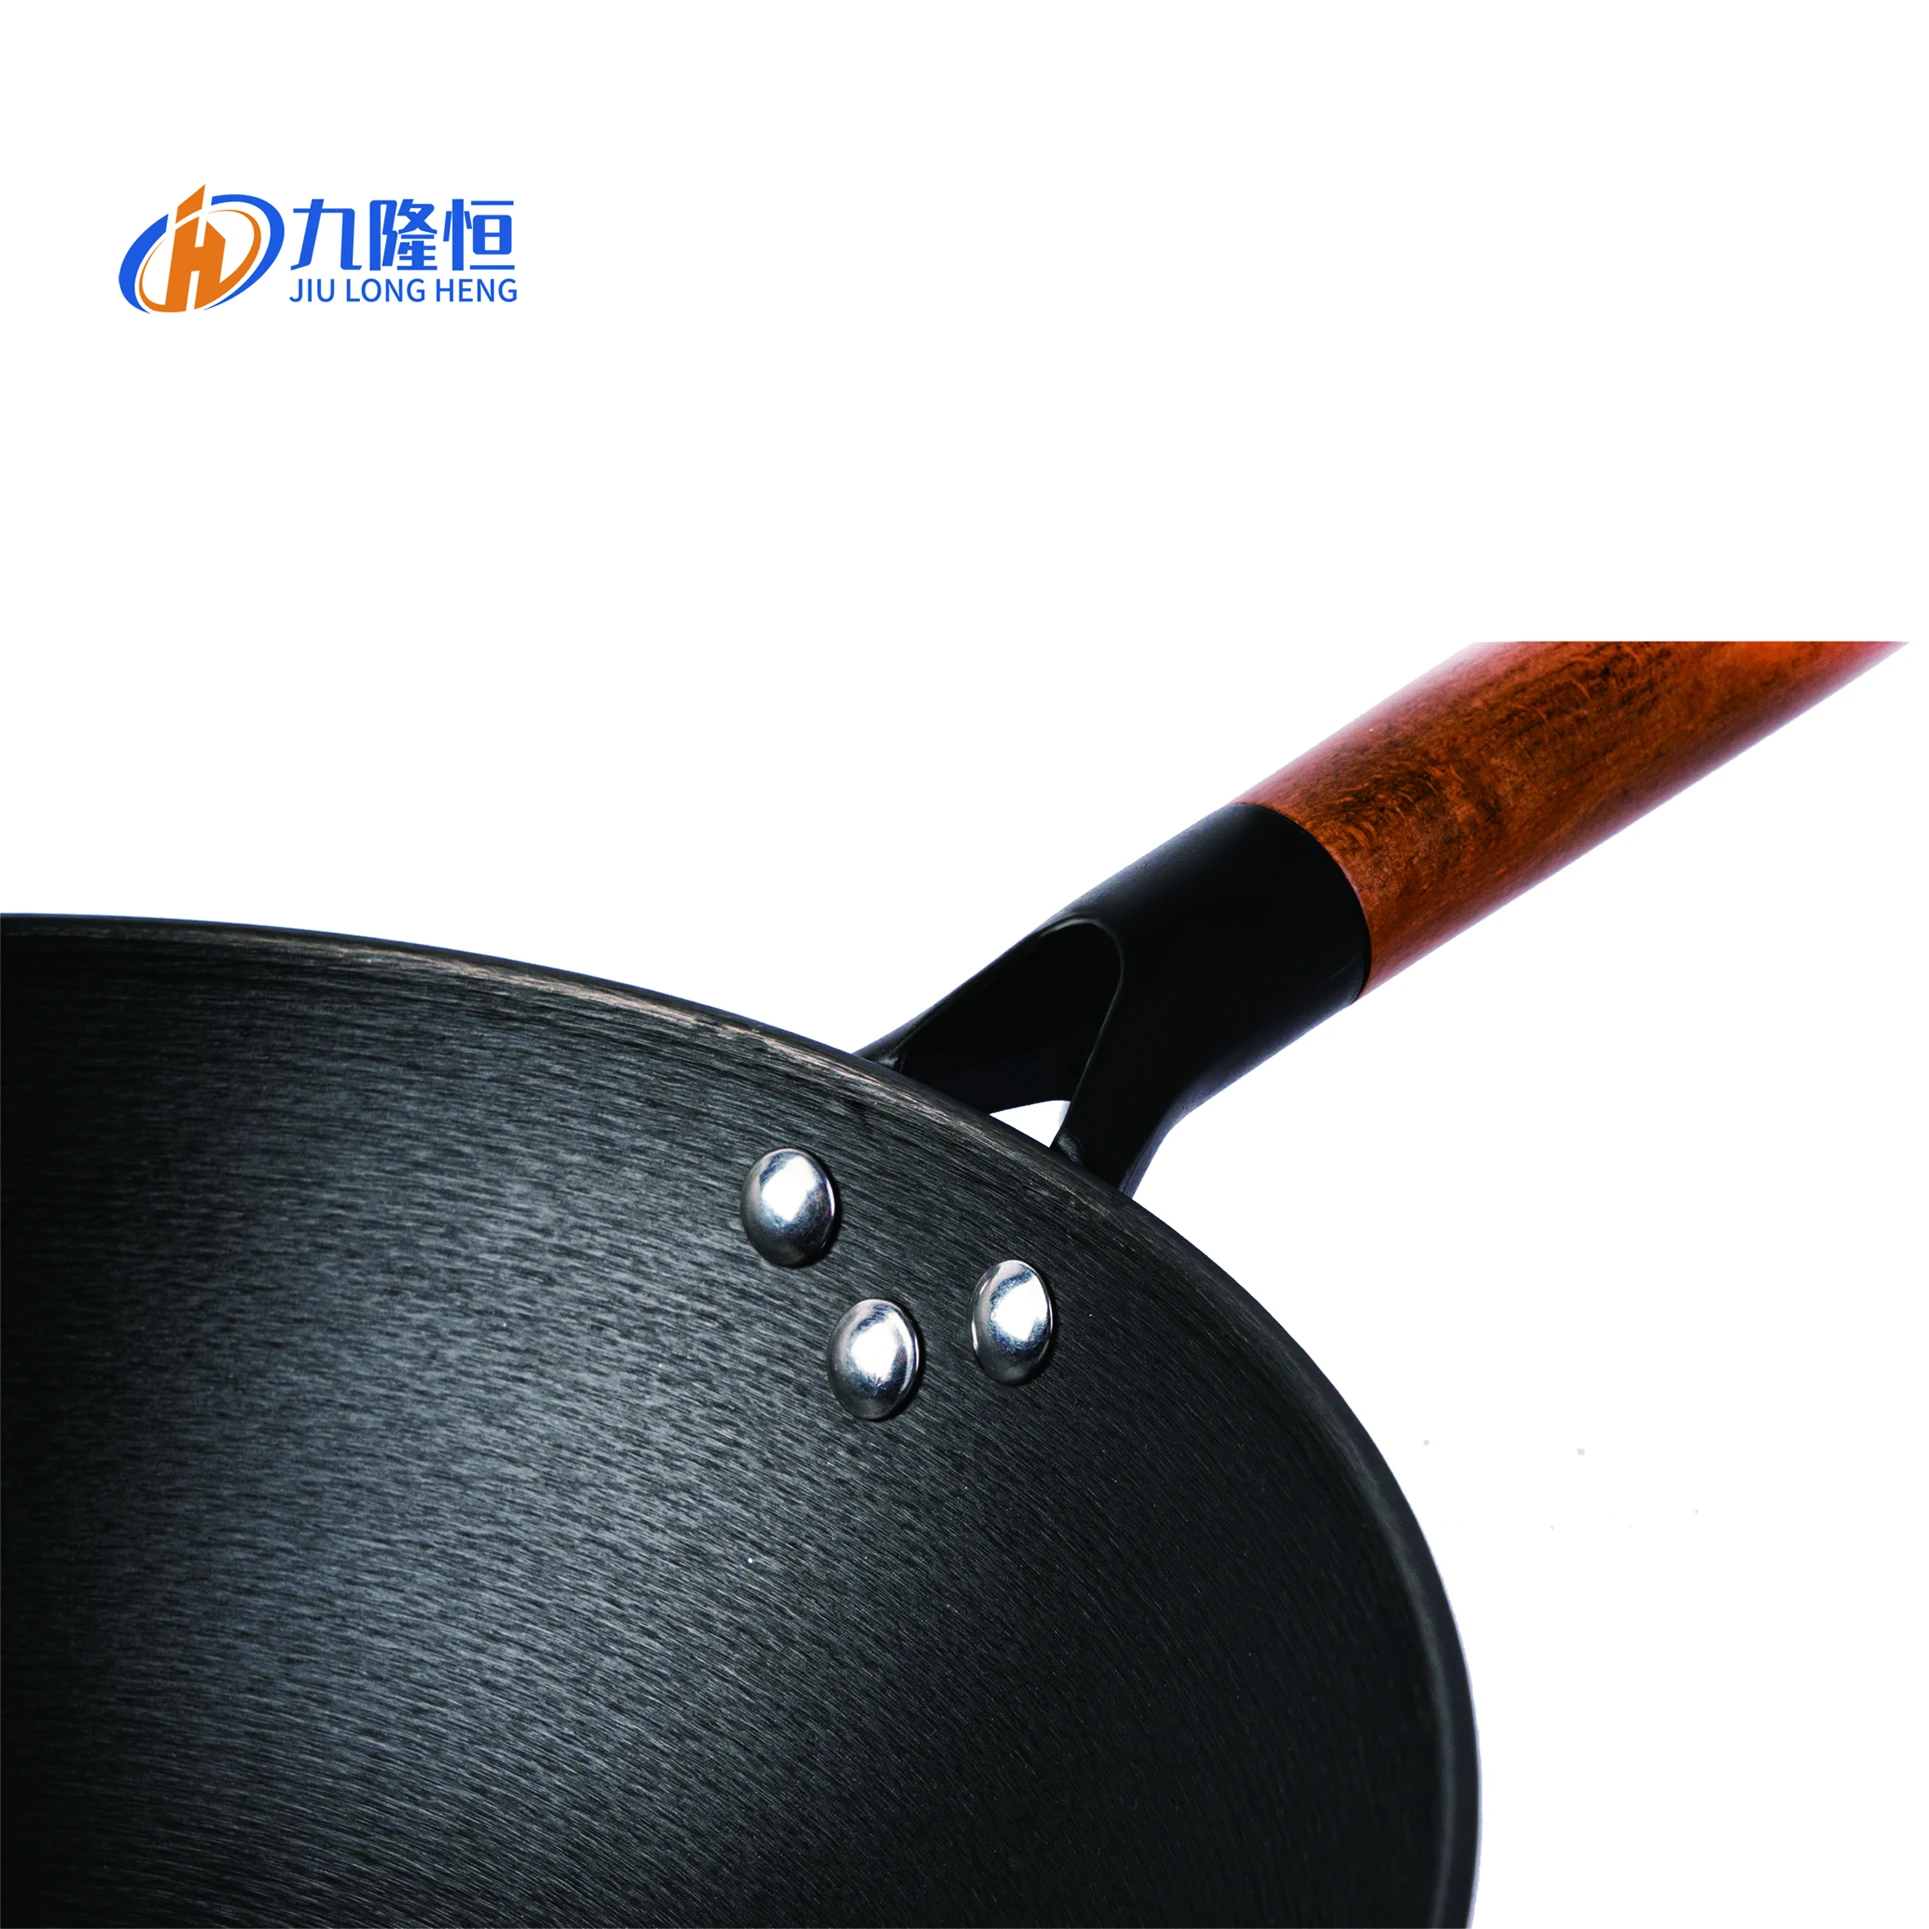 OEM Wholesale 30cm Chinese Breakfast Cast Iron Frying Wok Pan With Glass Lid